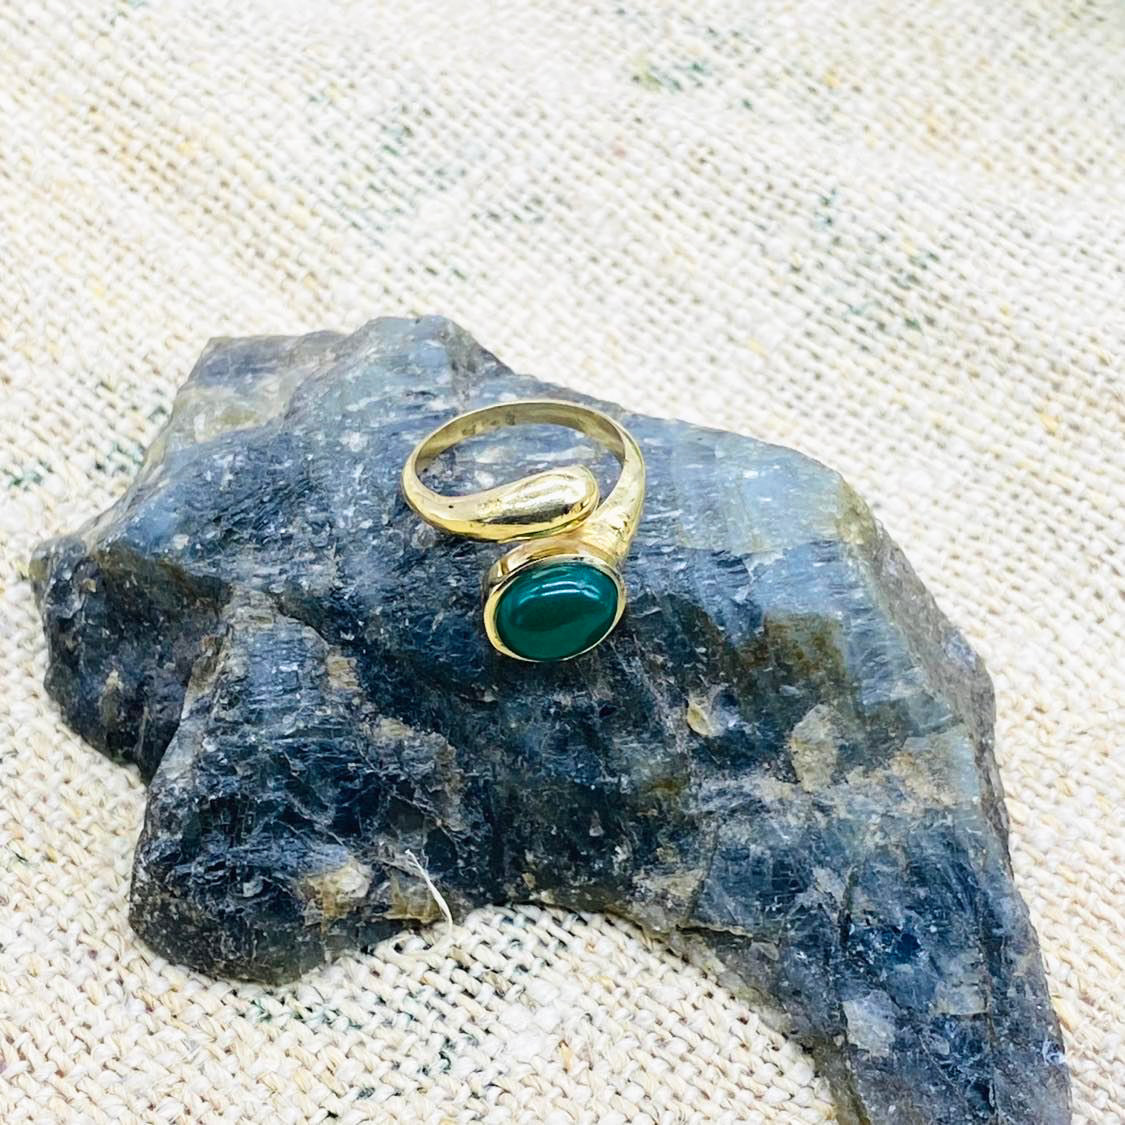 Gold Filled Bohemian Snake Rings, Stackable Crystal Ring, Boho Style, Vintage Jewelry, Adjustable Non Tarnish Statement Rings, Gift Under 20